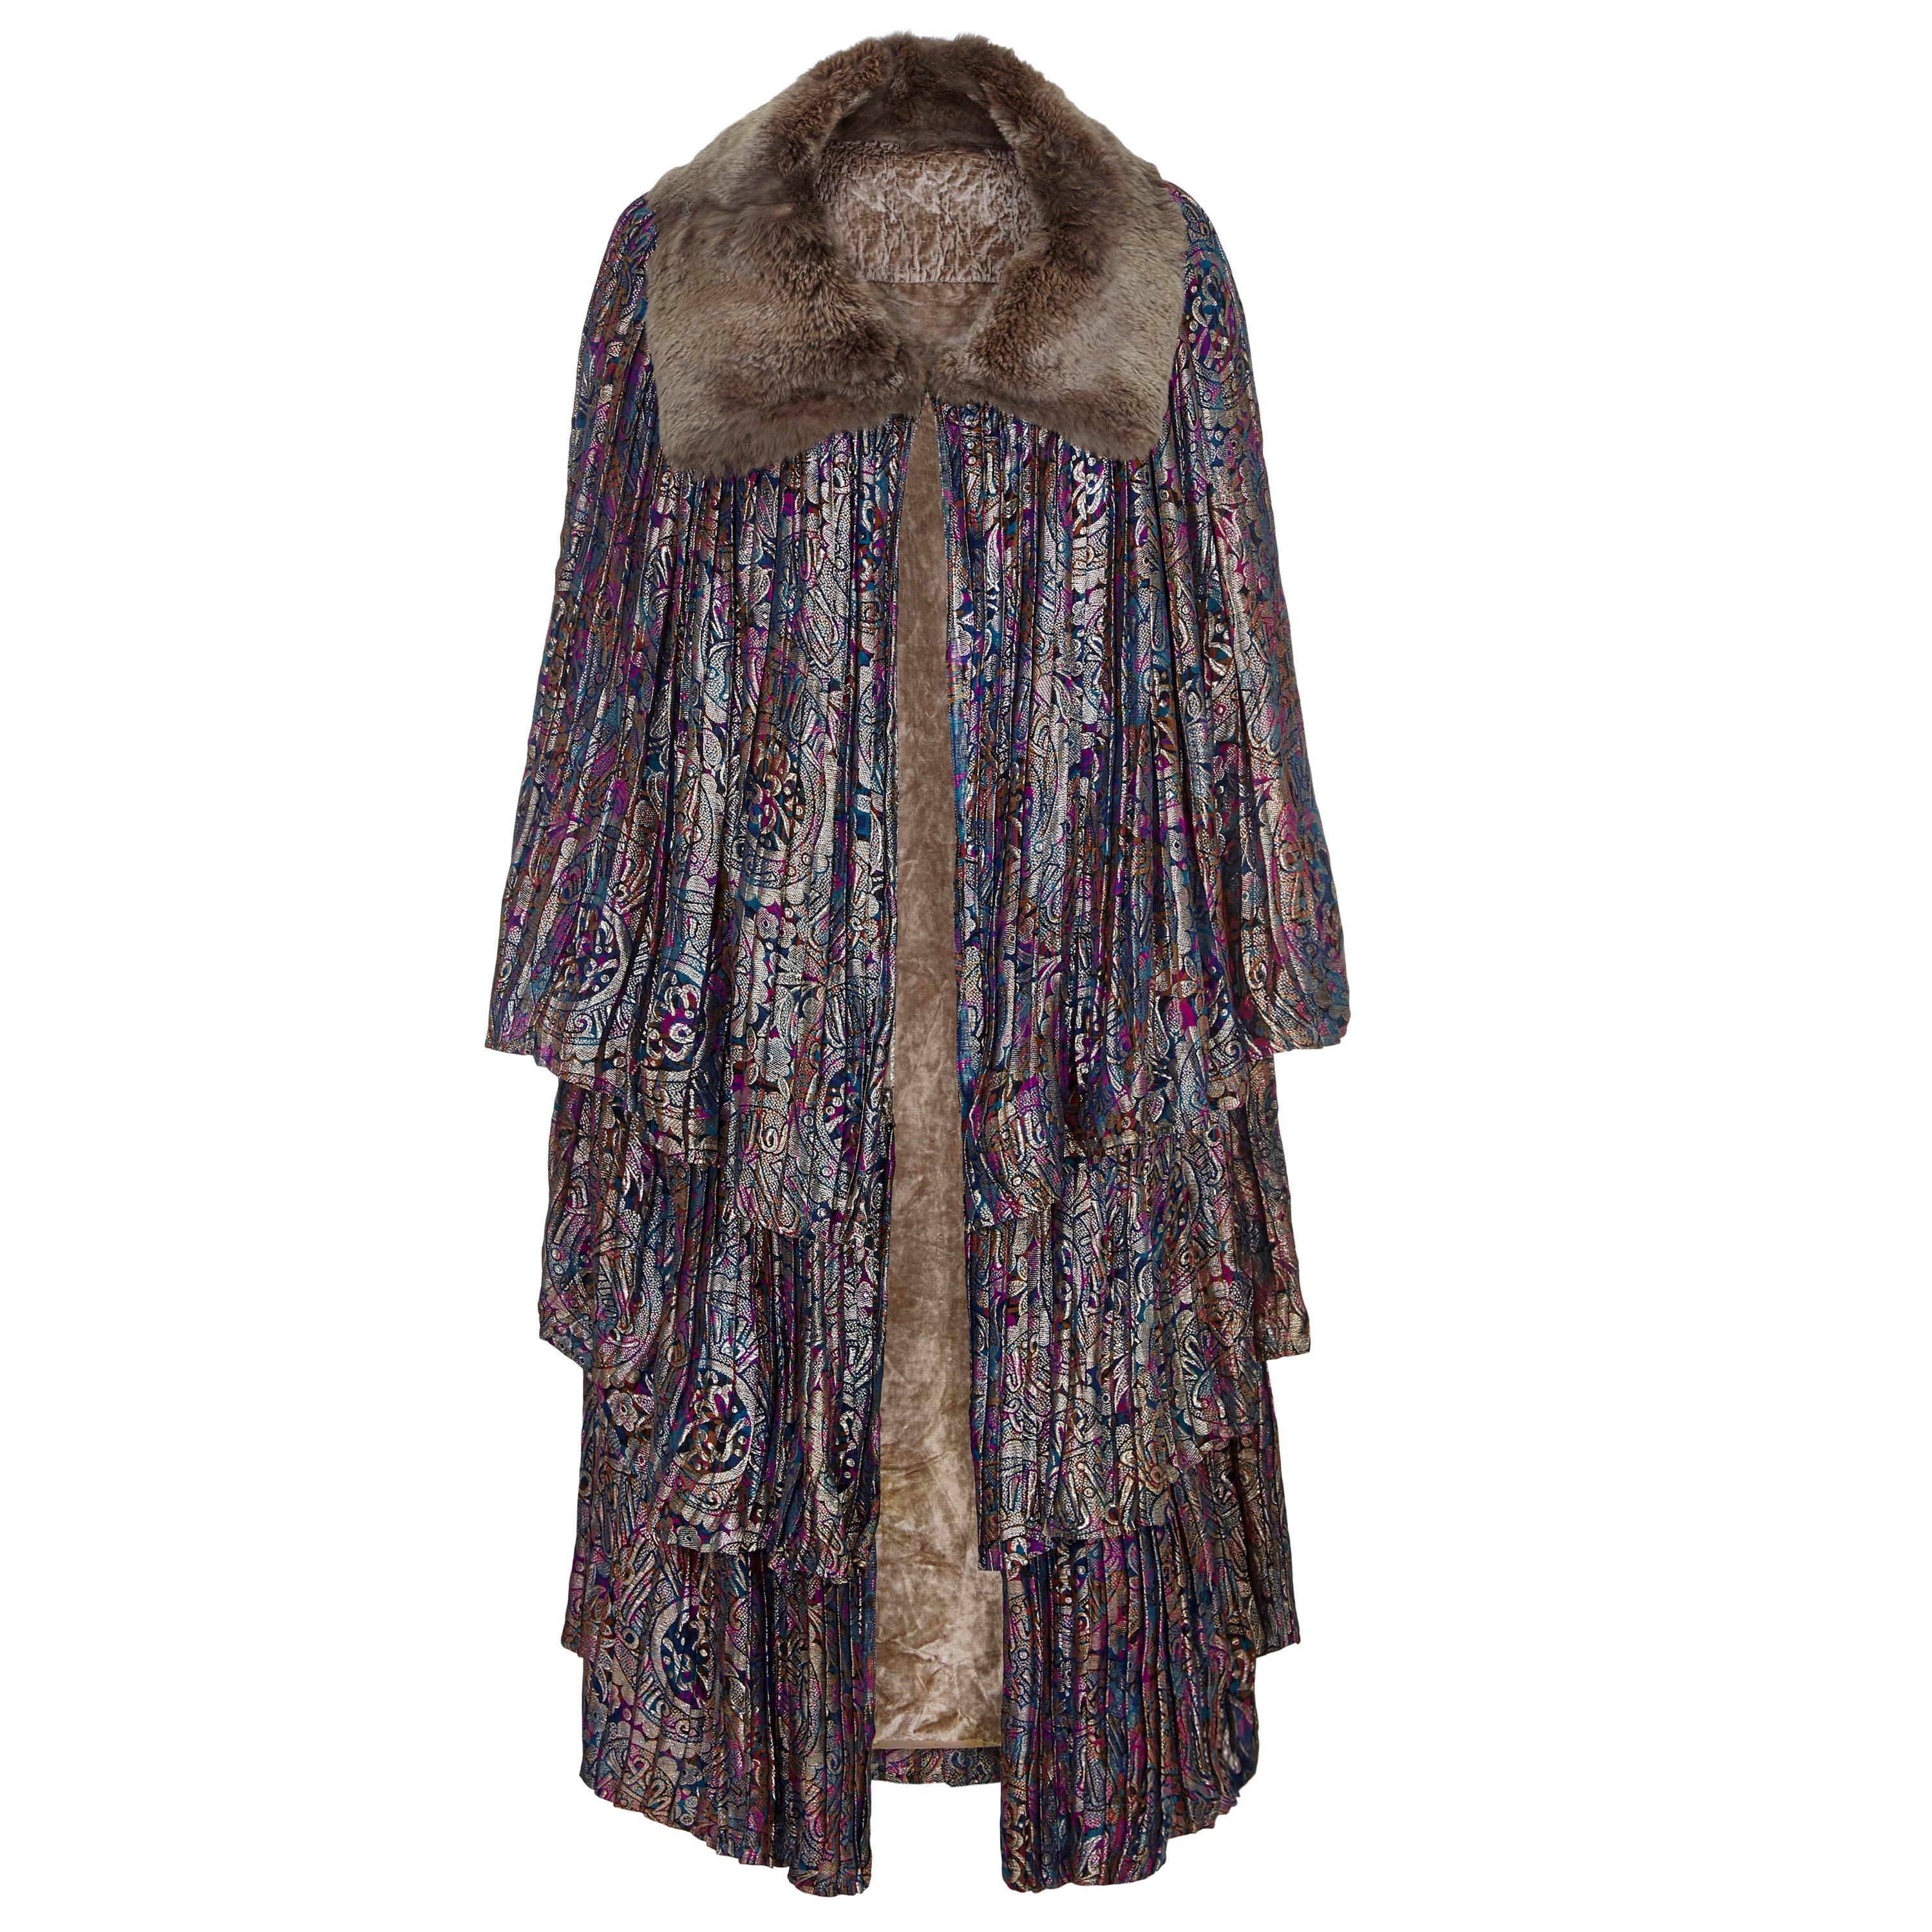 1920s Lame Tiered Opera Cape with Fur Collar